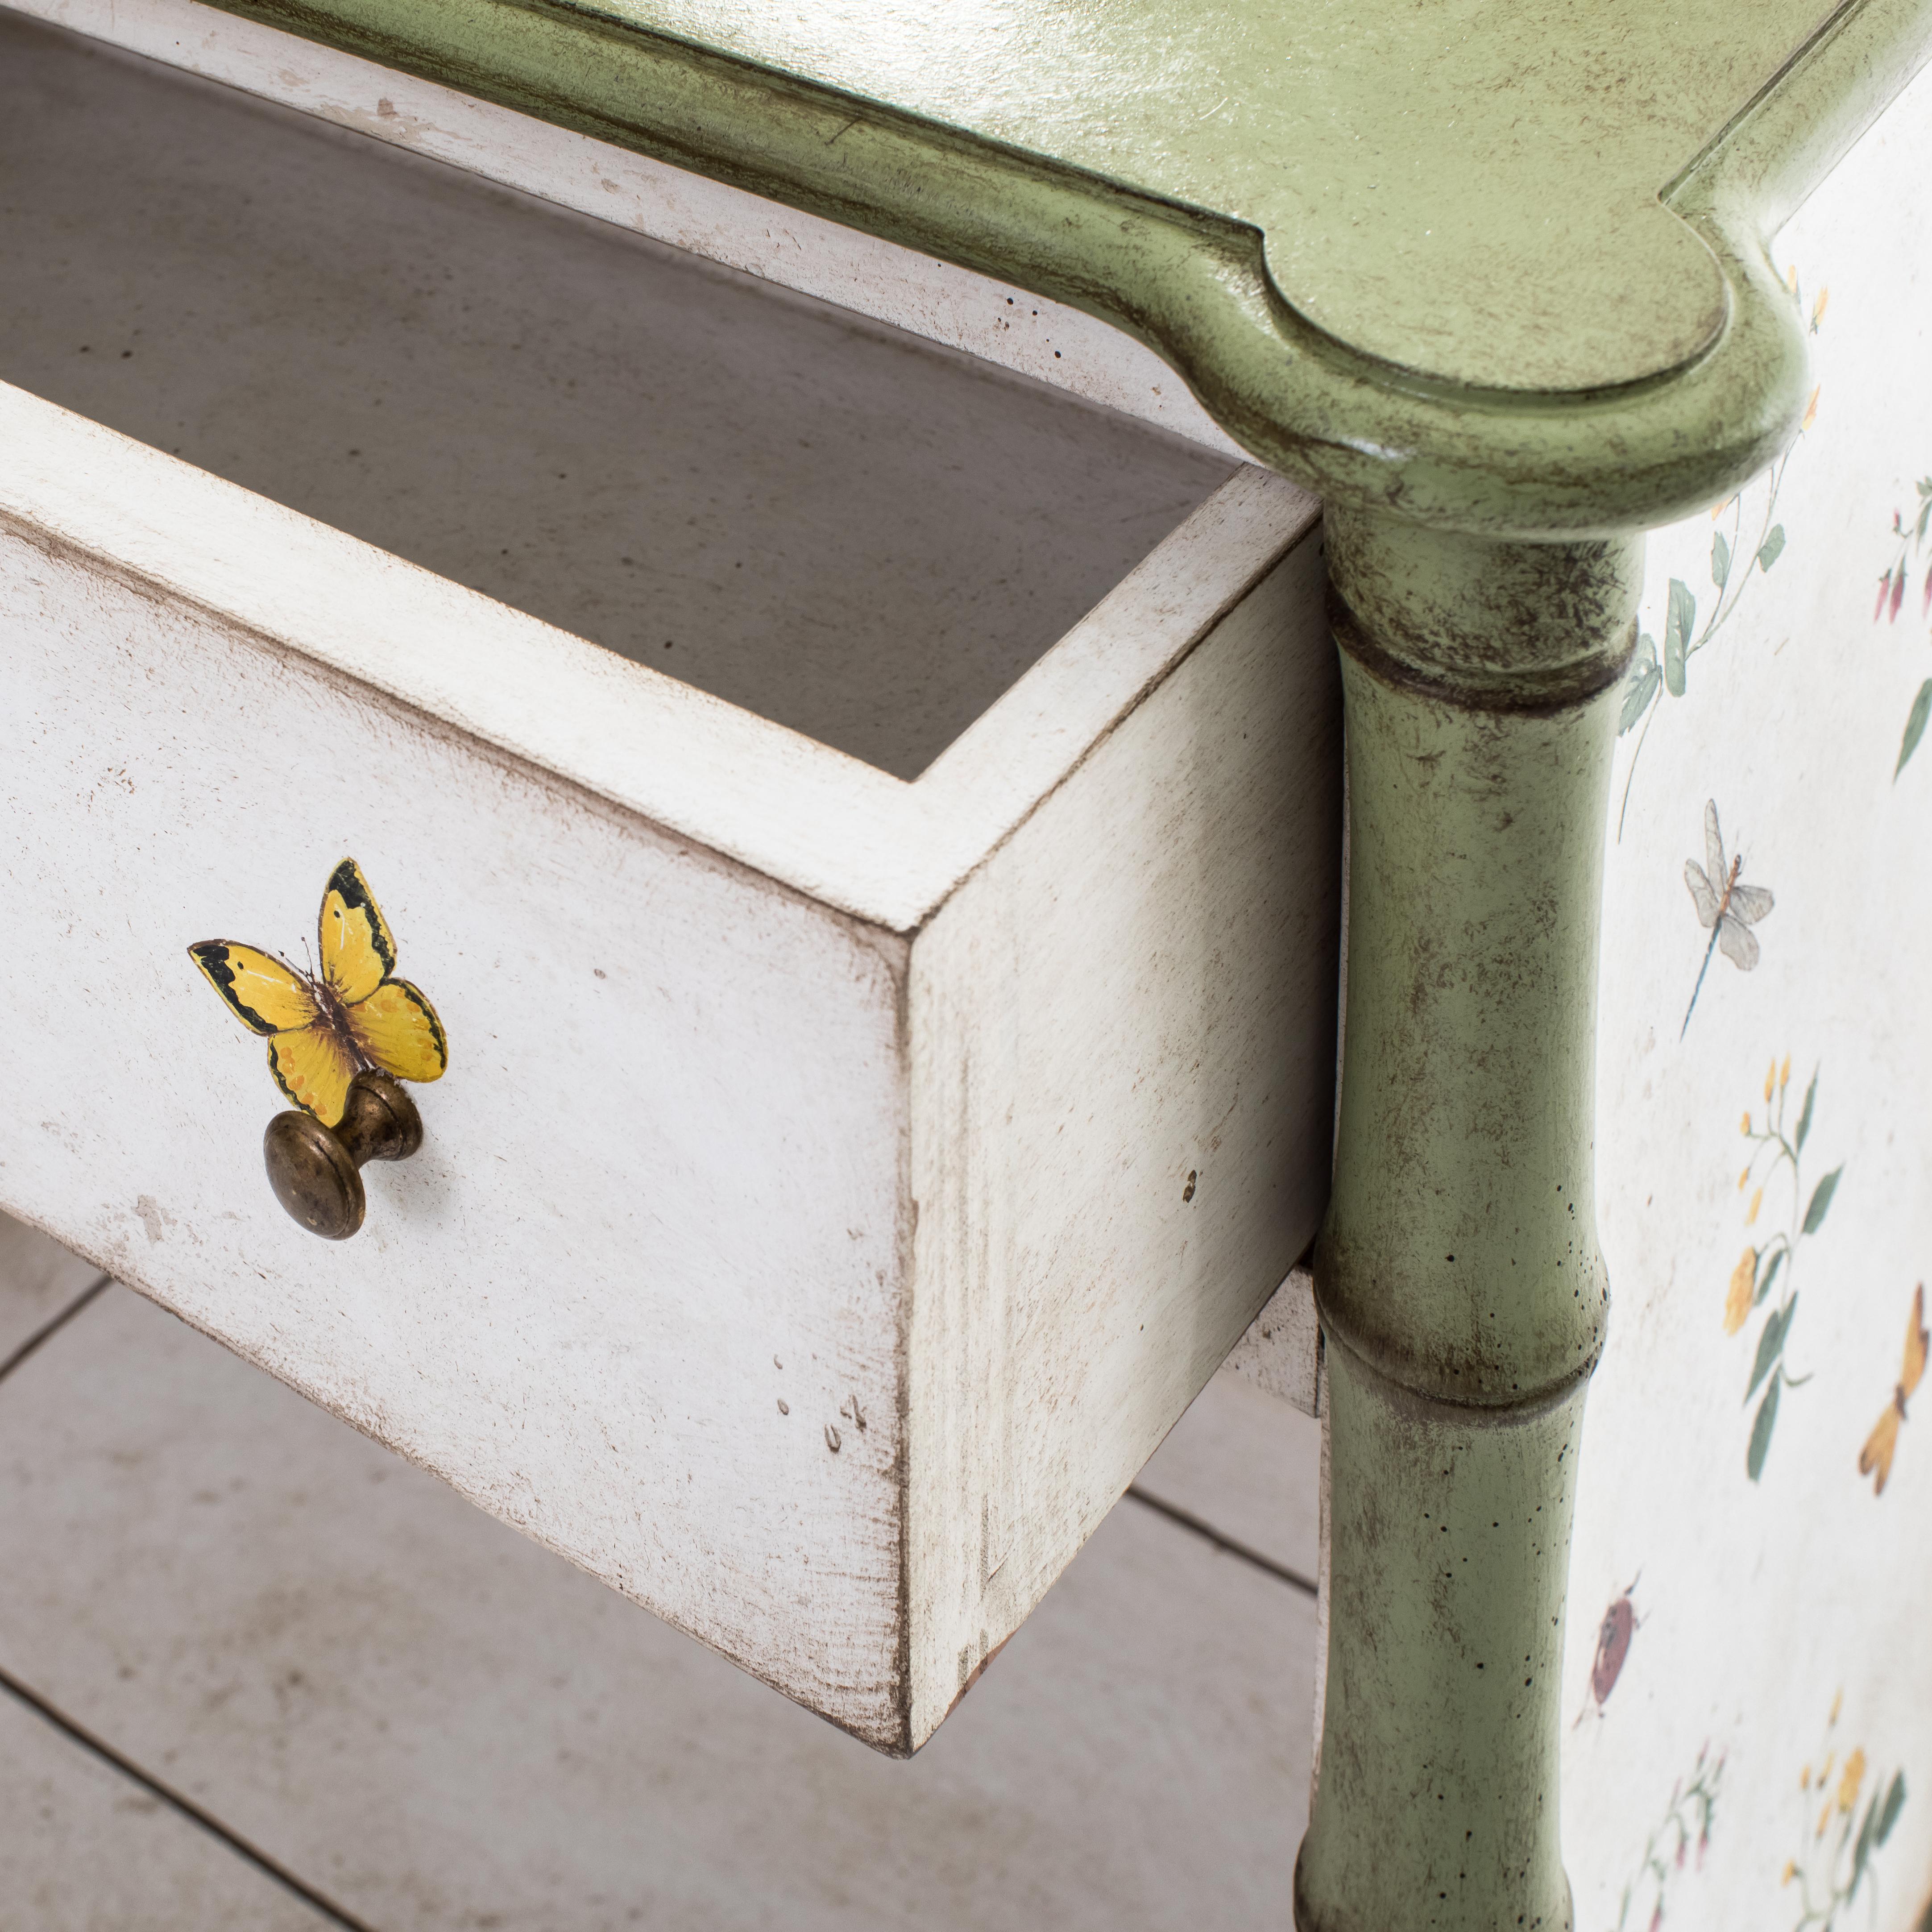 From our hand-painted furniture collection, we are pleased to introduce you to our Lombardia Bamboo Nightstand with shelf. 

A serenade in apple green, sweetly hand-decorated with little colorful flowers, butterflies and even a ladybug, gently